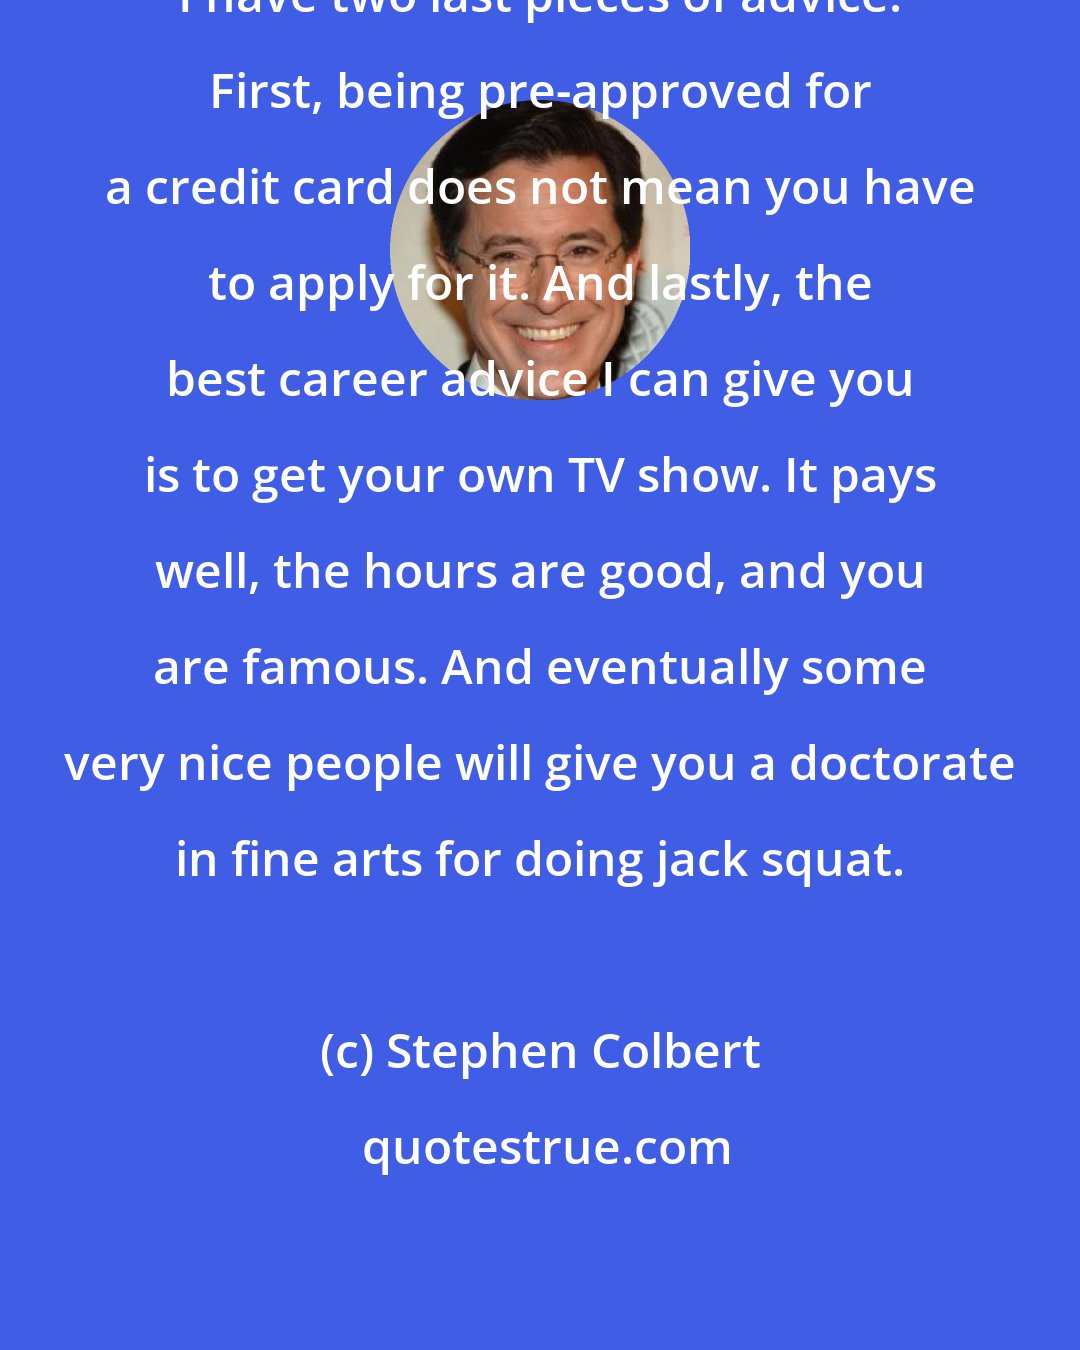 Stephen Colbert: I have two last pieces of advice. First, being pre-approved for a credit card does not mean you have to apply for it. And lastly, the best career advice I can give you is to get your own TV show. It pays well, the hours are good, and you are famous. And eventually some very nice people will give you a doctorate in fine arts for doing jack squat.